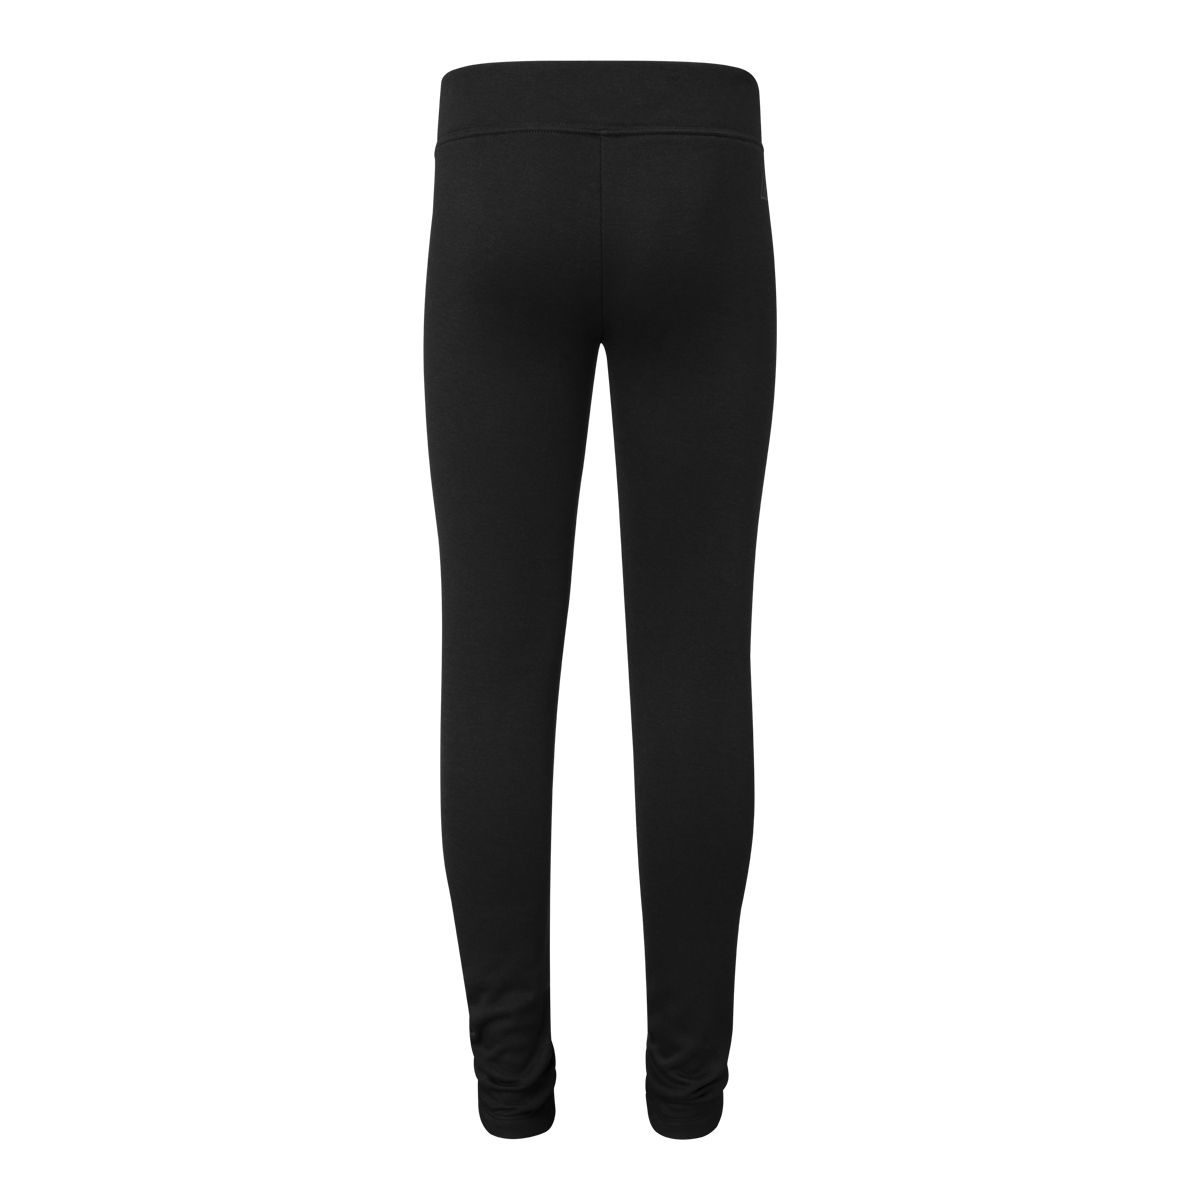 Customizable Stylish Girls Toddler Leggings For Outdoor Travel And Students  Computer Printed Casual Wear For 4 13 Years Style 2555 Q2 From Dp02, $5.52